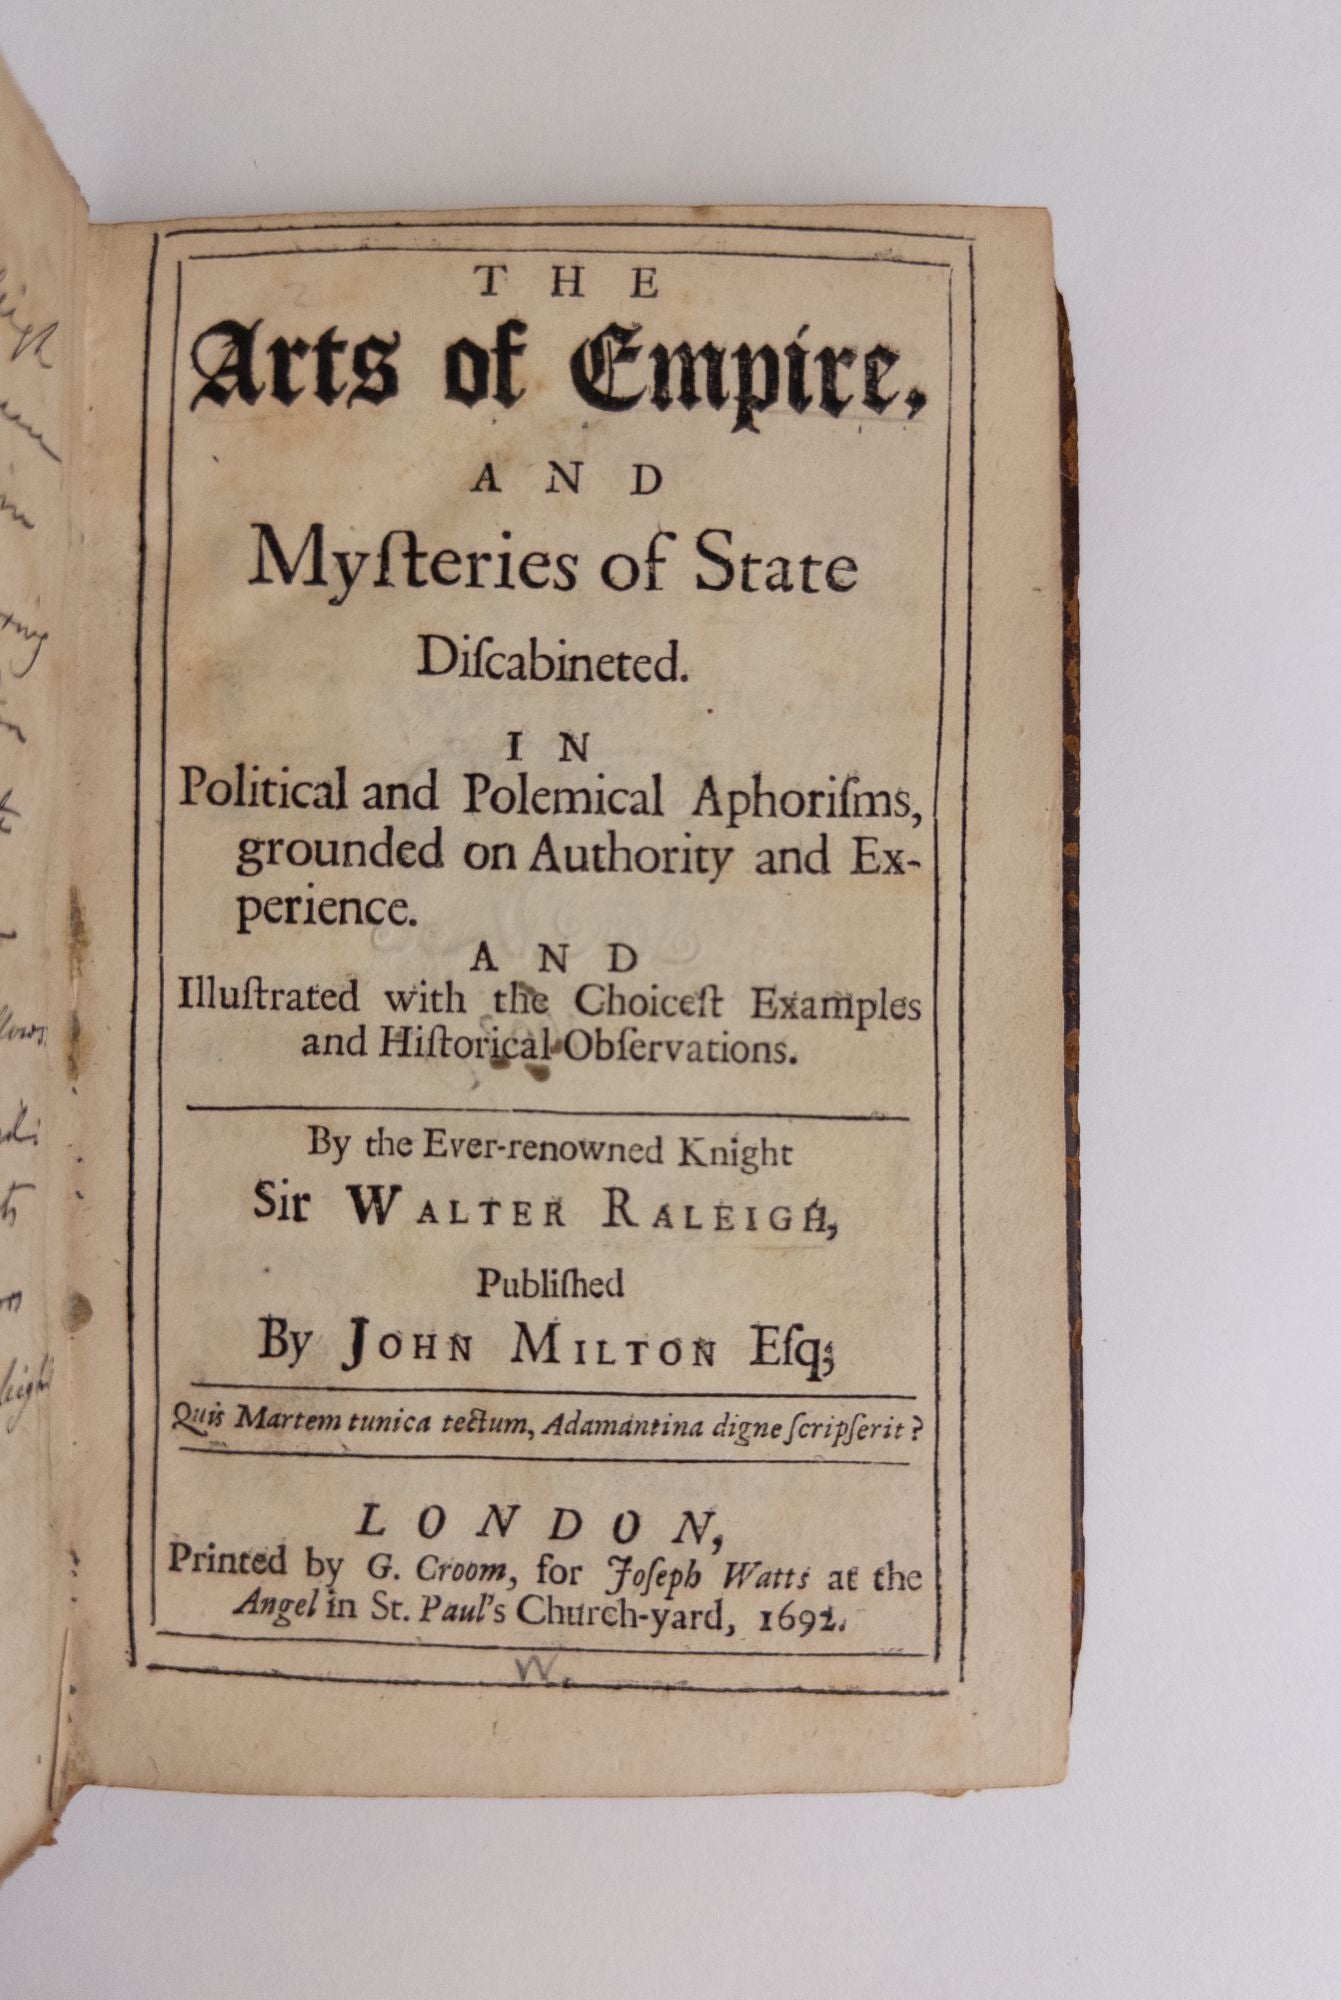 Product Image for THE ARTS OF EMPIRE AND MYSTERIES OF STATE